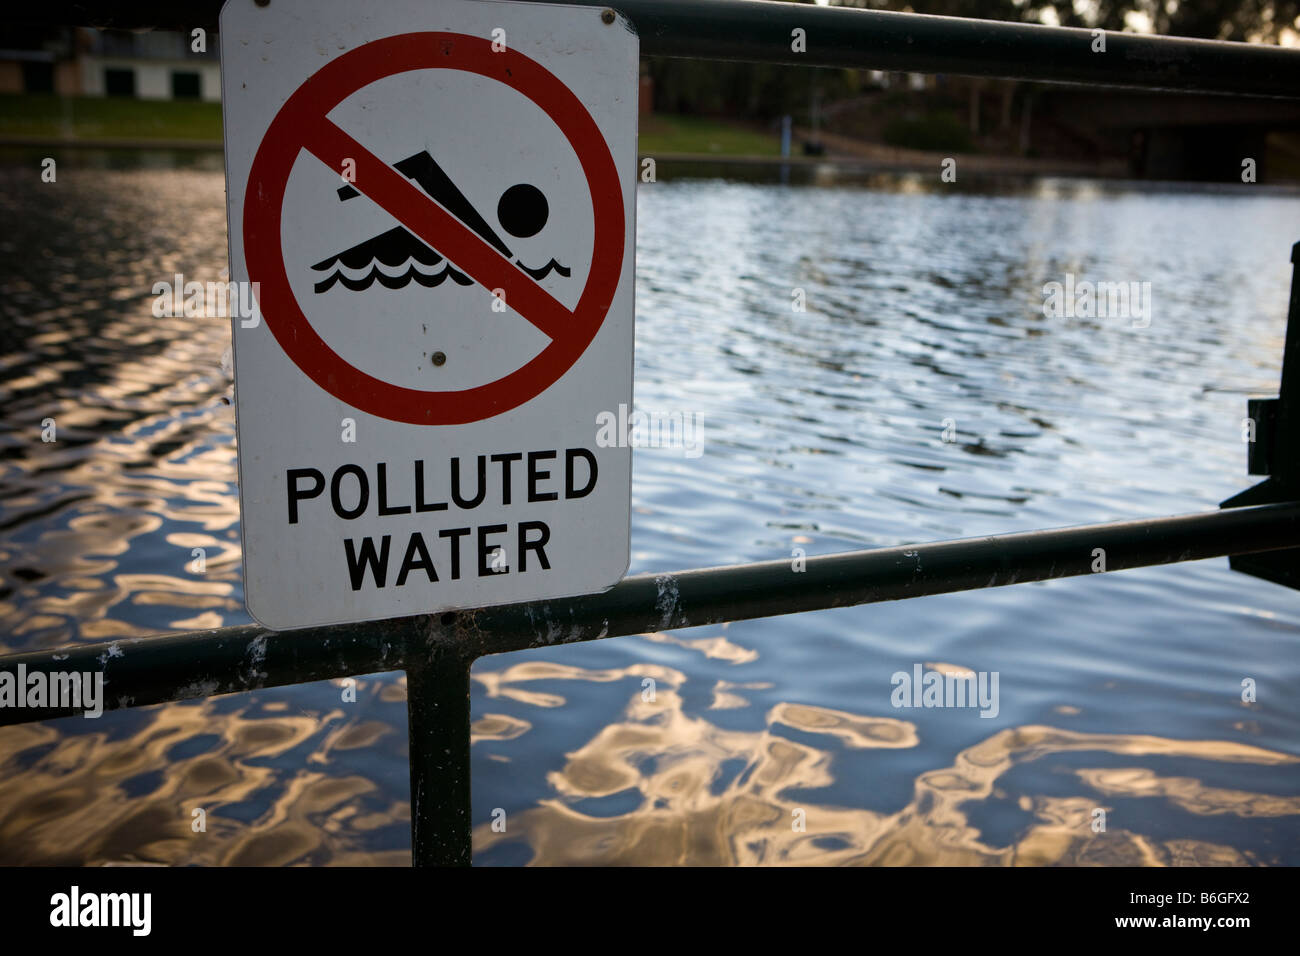 A warning sign prohibiting swimming due to polluted water, Torrens River, Adelaide, South Australia, Australia Stock Photo